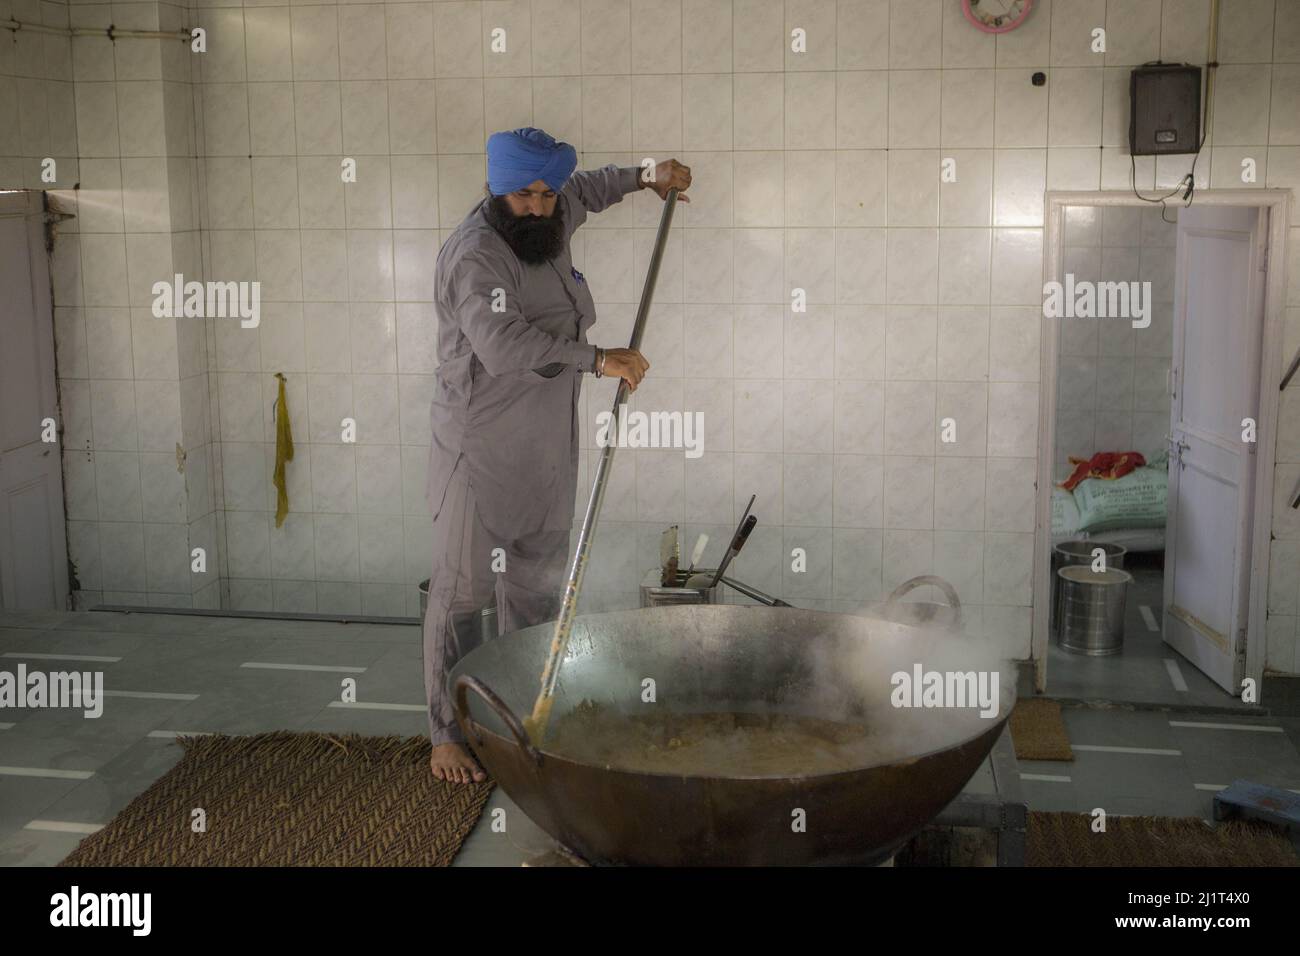 A Sikh man cooking in the free kitchen (Langar) of Gurdwara temple during daytime in New Delhi, India Stock Photo